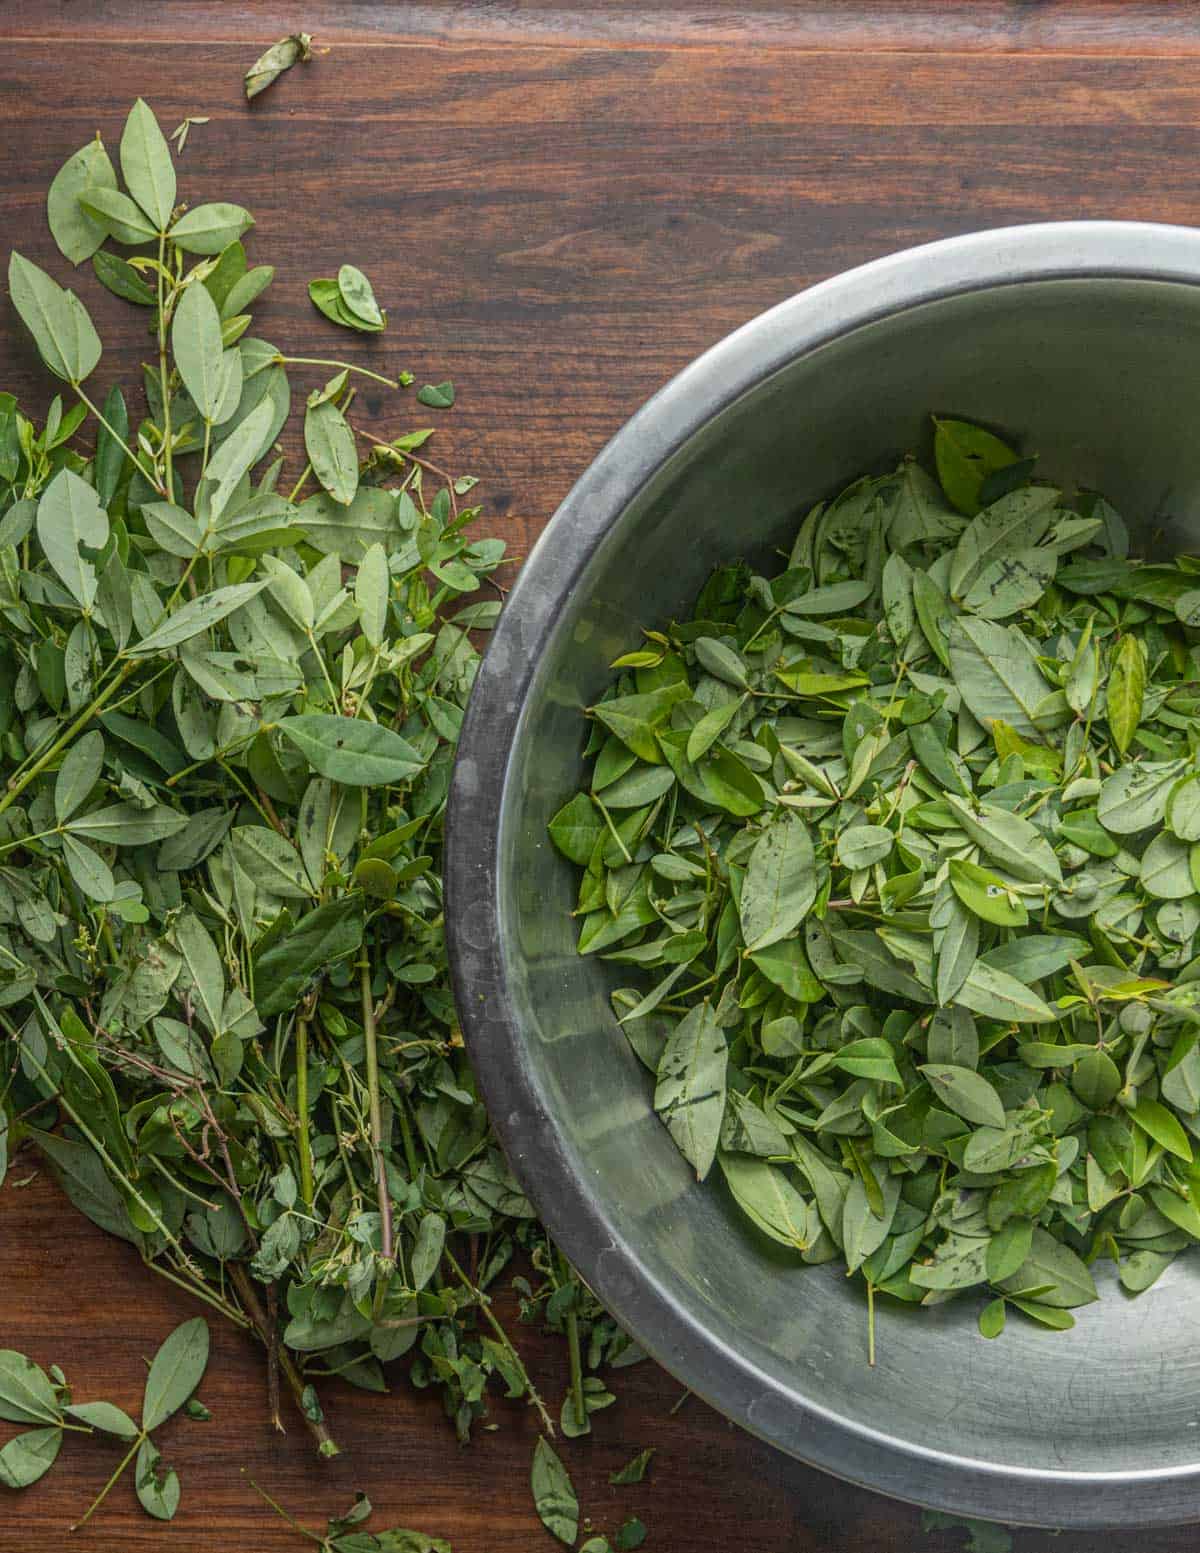 Removing the leaves from the chipilin plant in a bowl. 